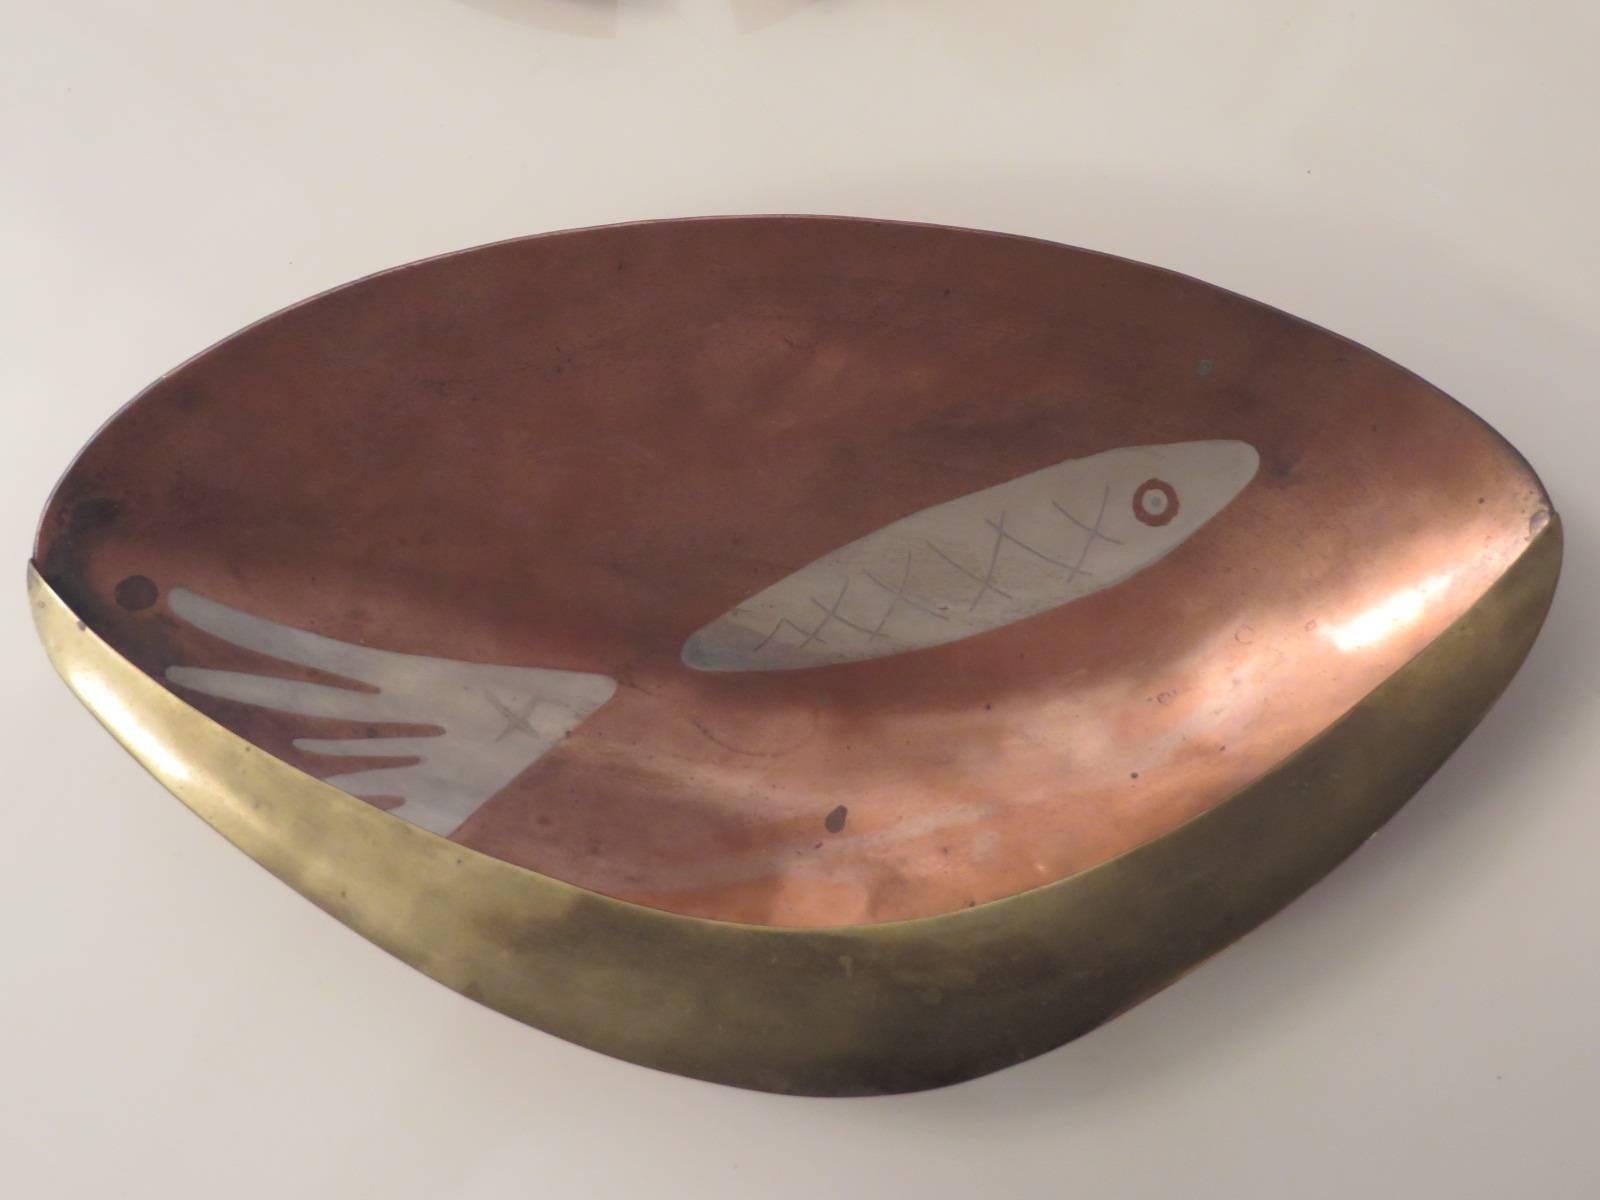 Hand-wrought, copper and silver shell bowl by Los Castillo, Mexico. Supported by three ball feet.